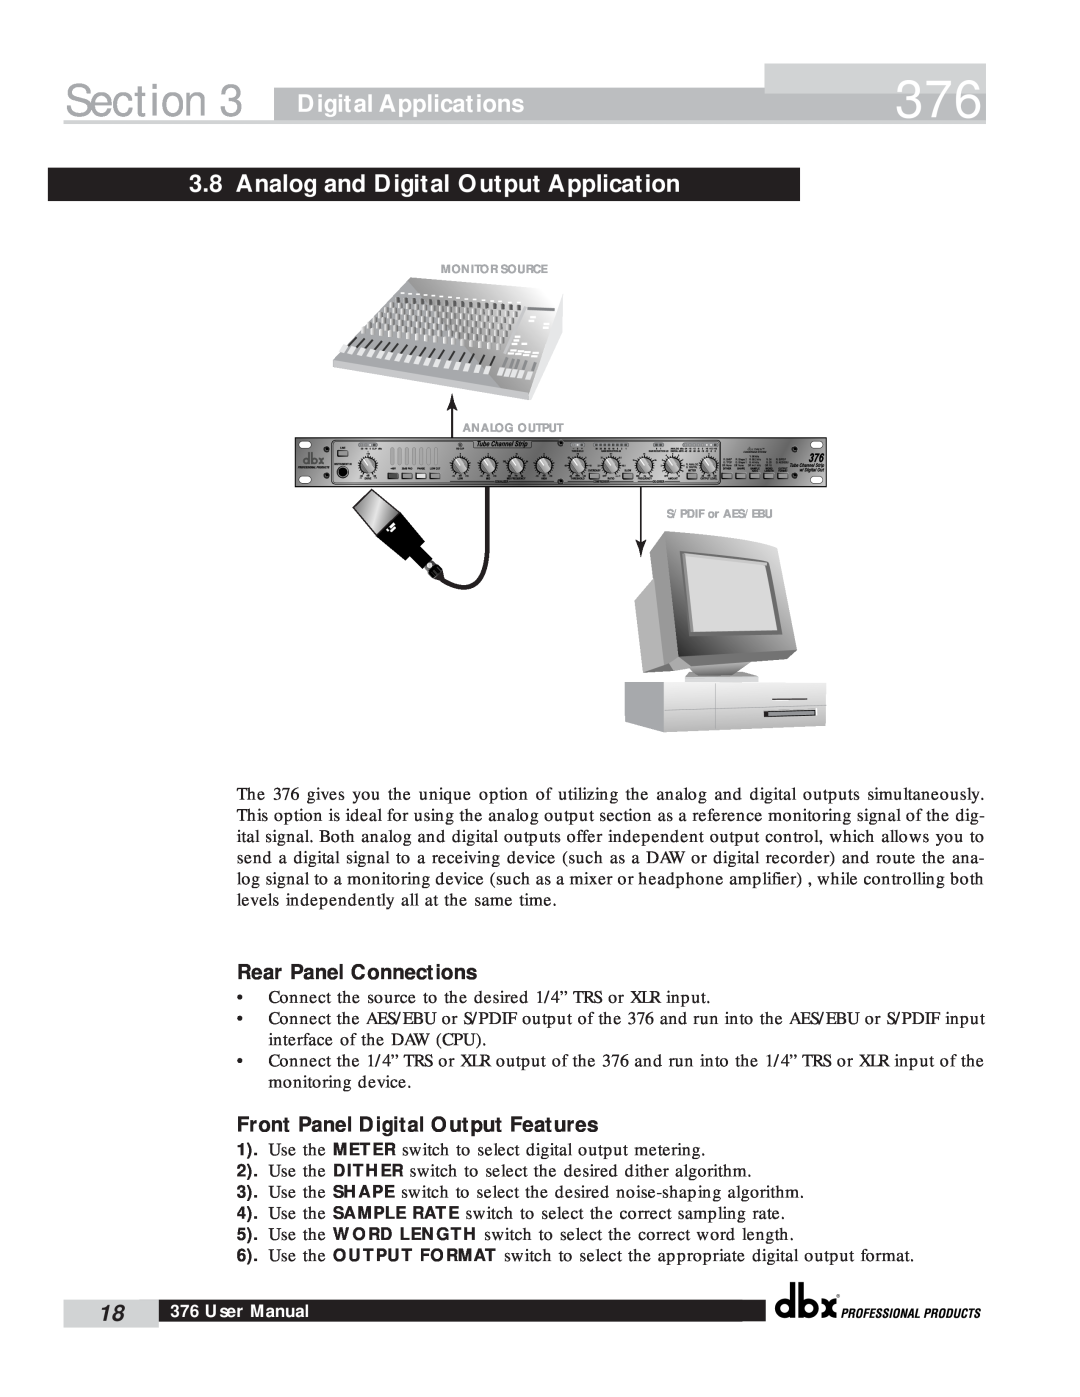 dbx Pro 376 user manual Analog and Digital Output Application, Section, Digital Applications, Rear Panel Connections 